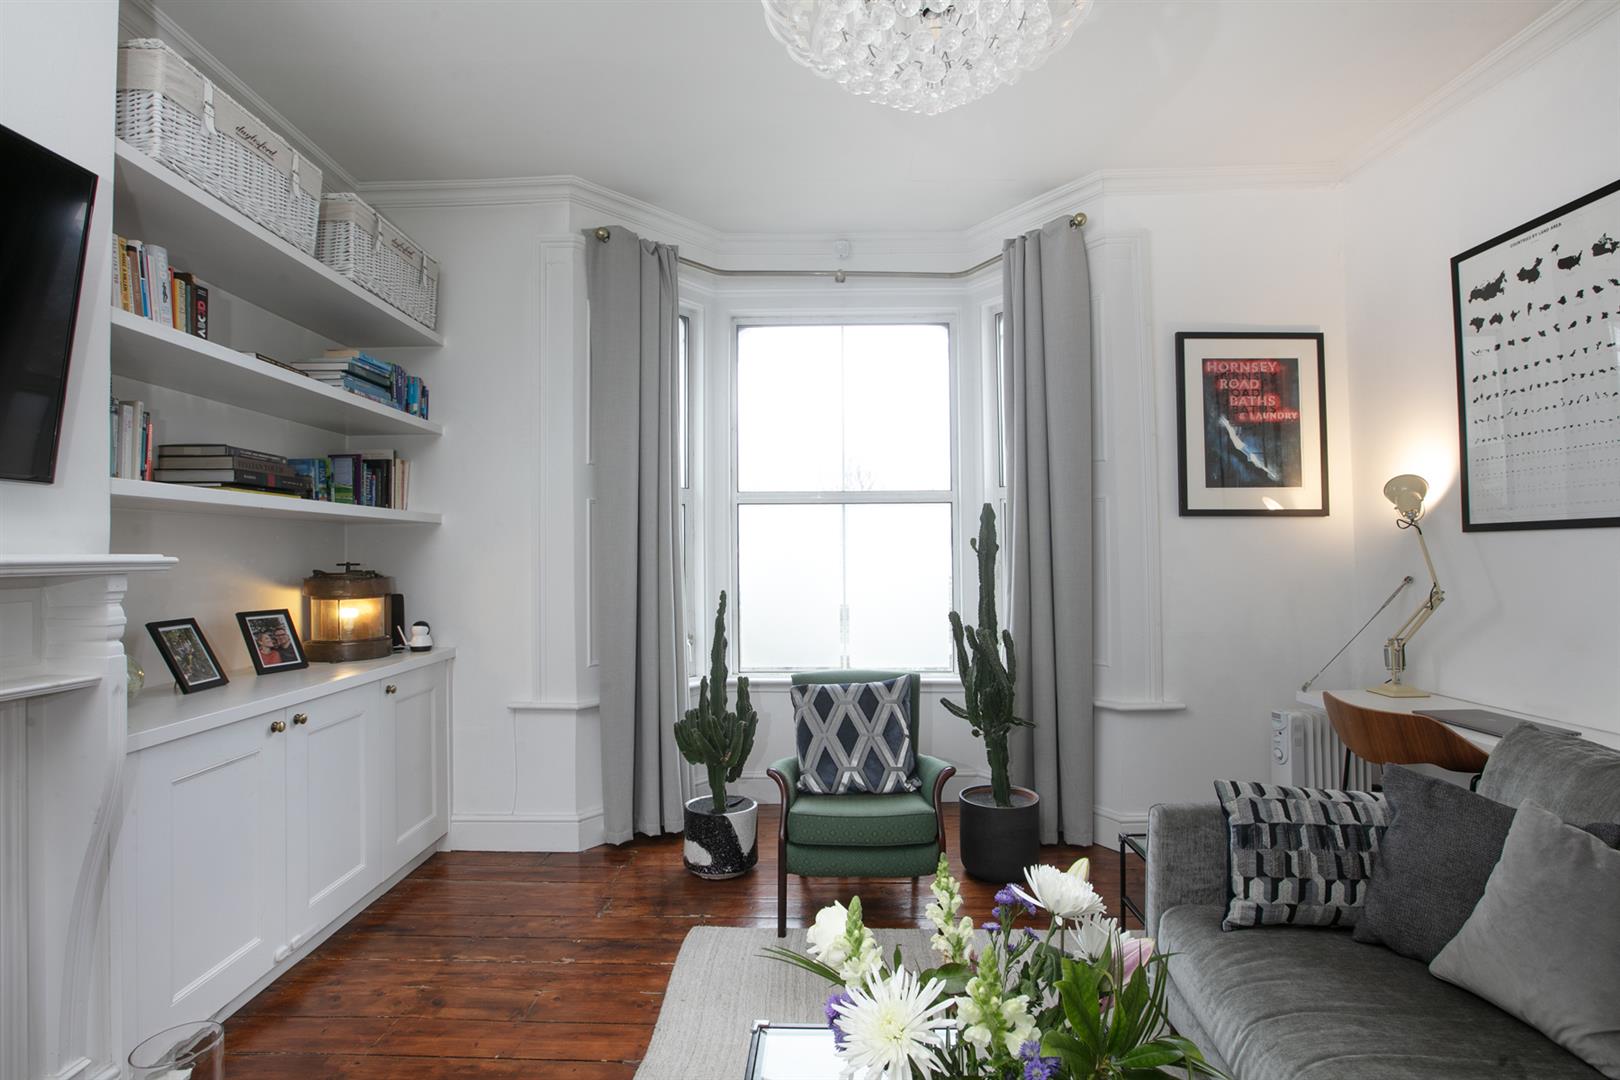 Flat - Conversion For Sale in Consort Road, Nunhead, SE15 1183 view12